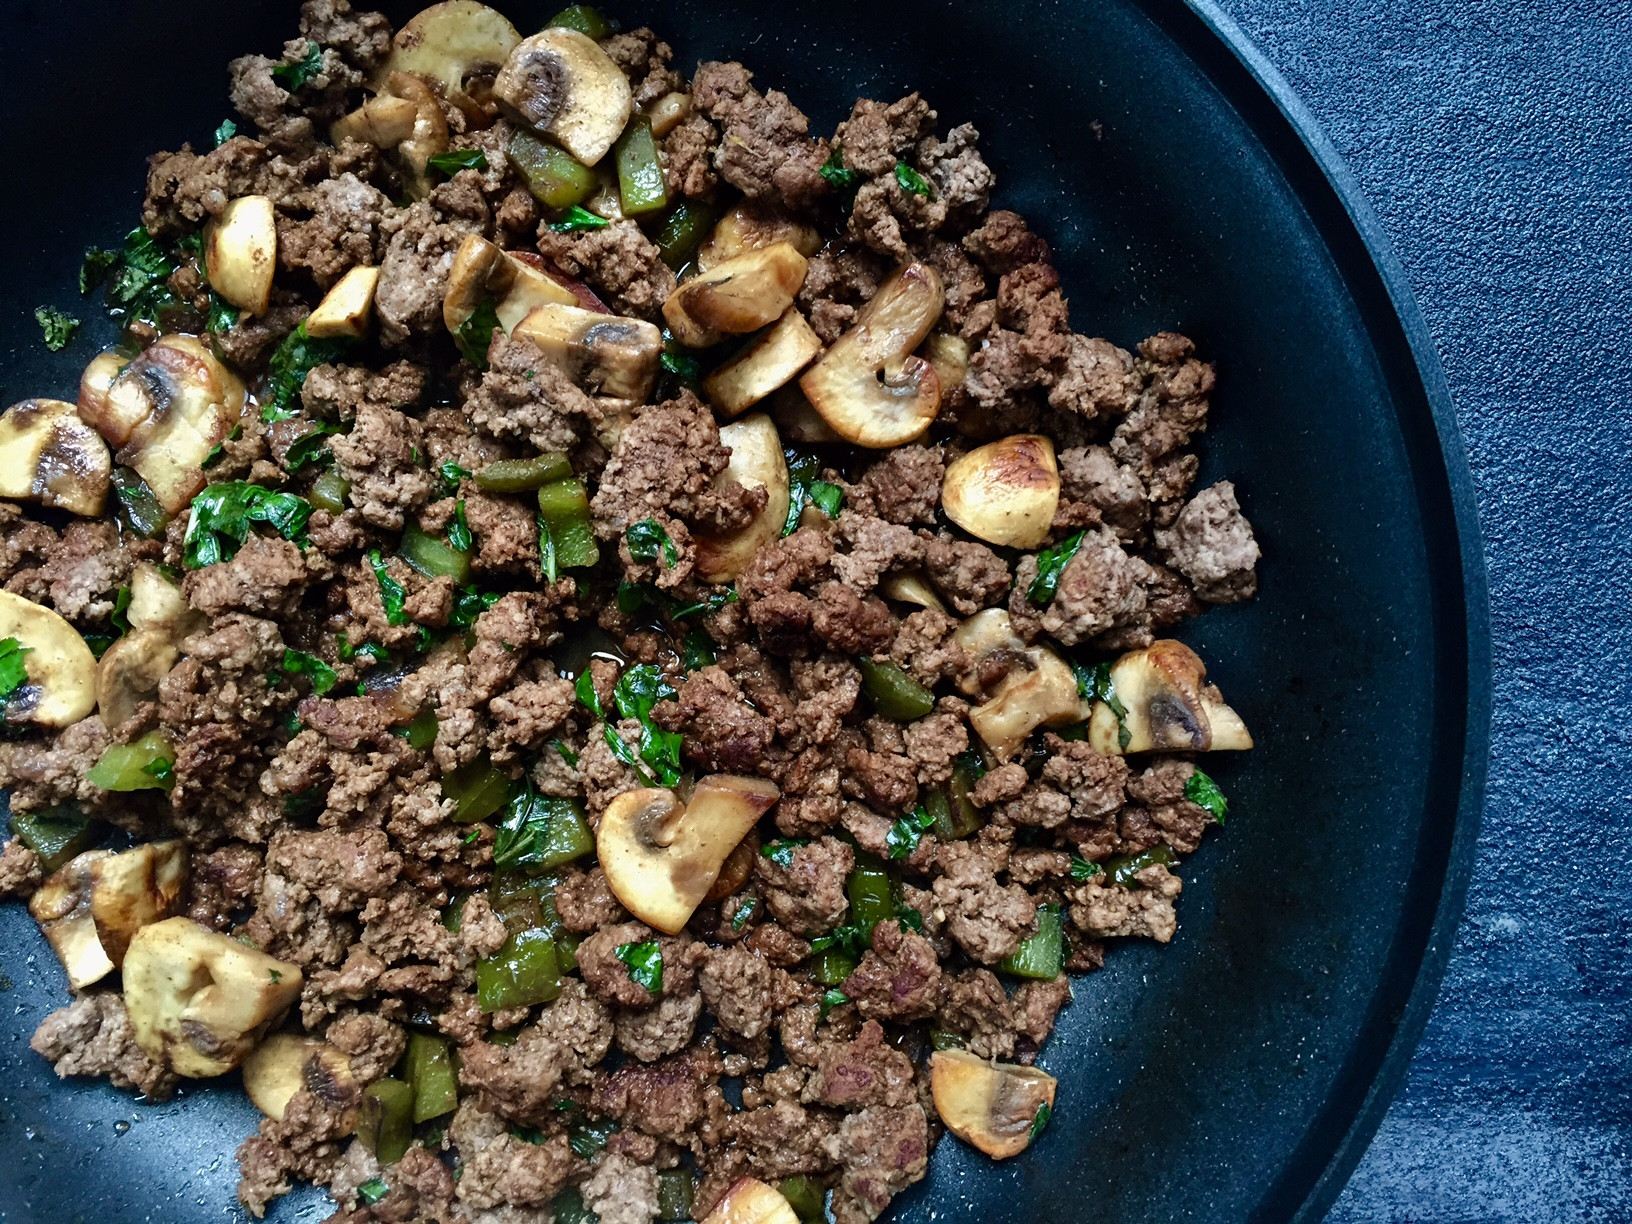 Ground Beef and Mushrooms Recipes Best Of Easy Mushroom and Ground Beef Skillet Mom to Mom Nutrition